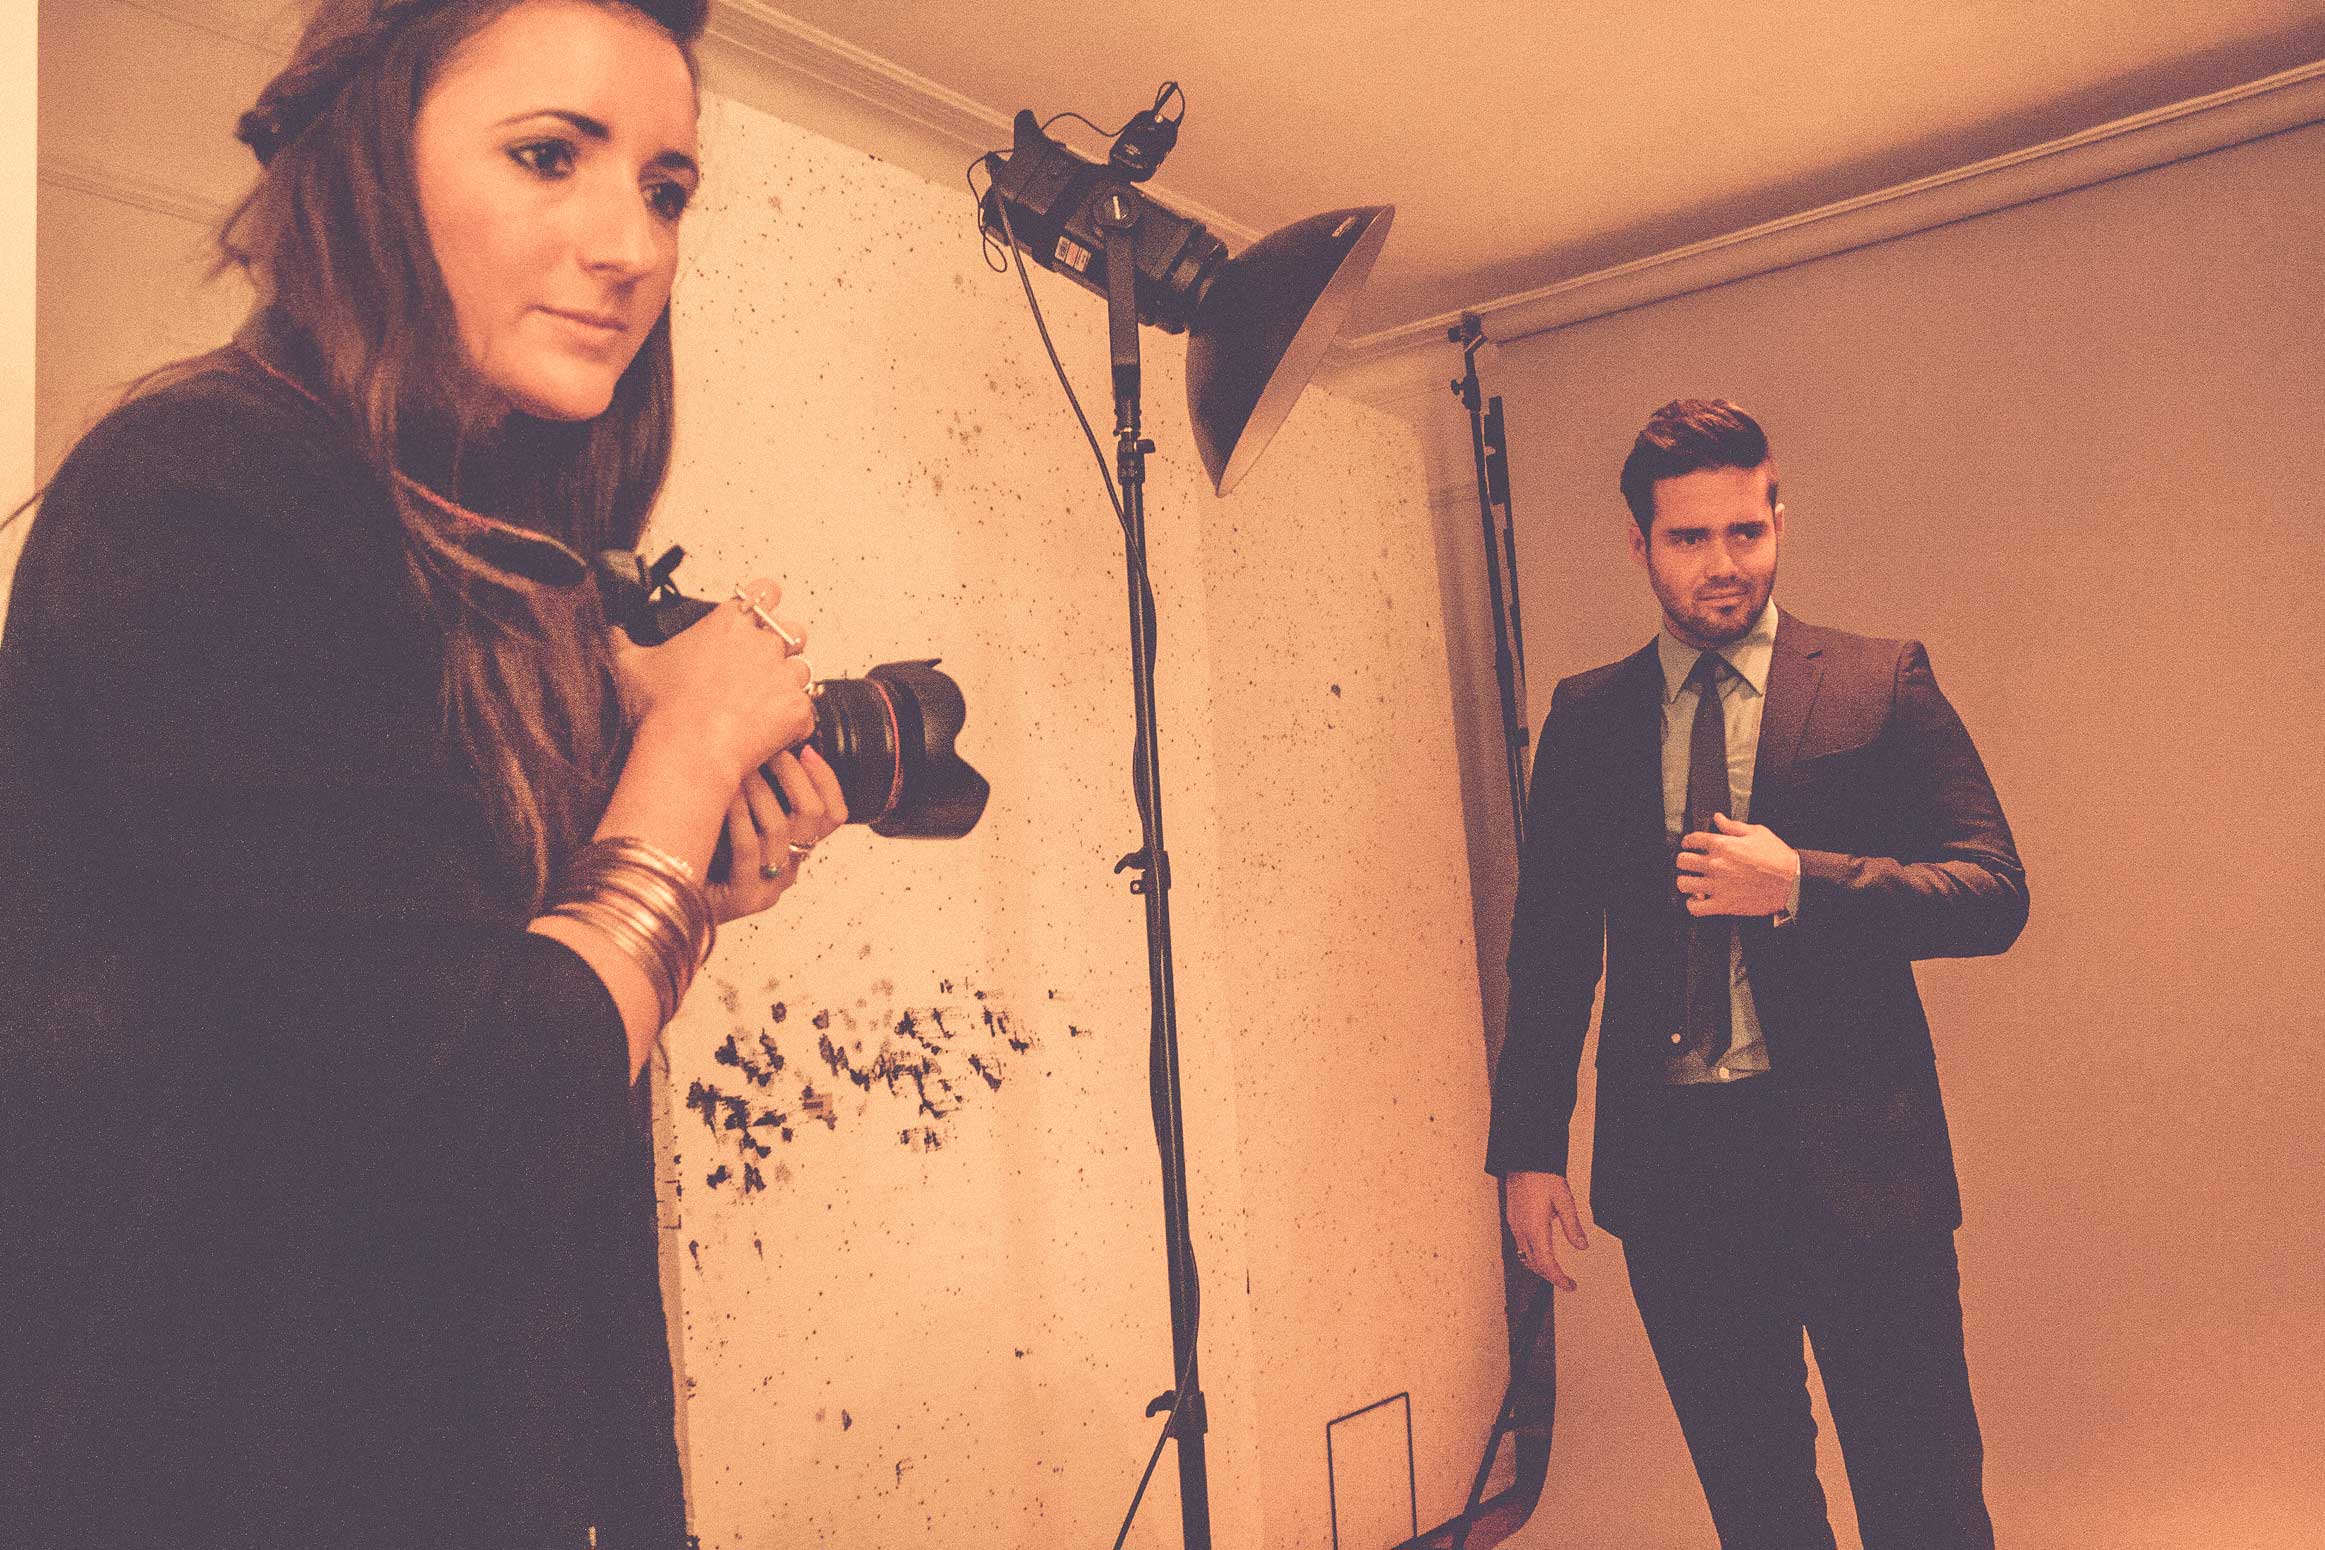 spencer-matthews-louise-thomspon-made-in-chelsea-shoot-bts-a1